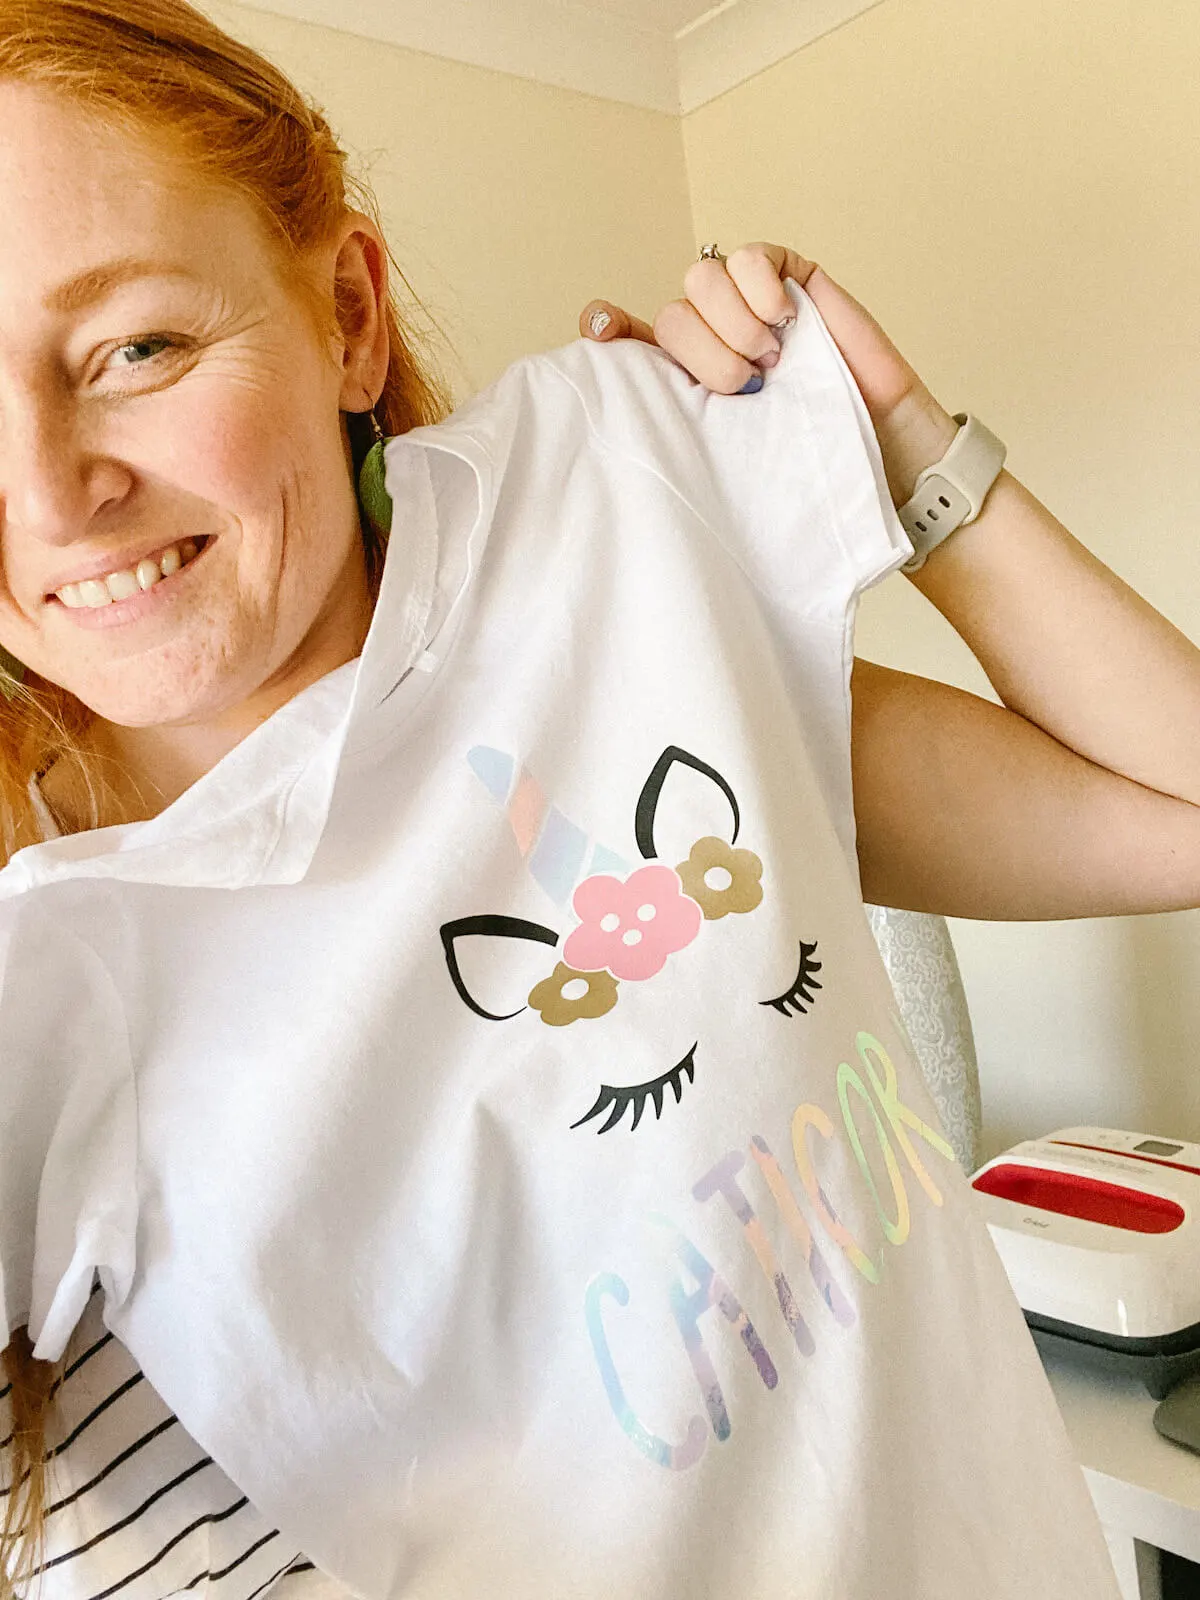 Holly holding a white t-shirt with an iron on vinyl design of a unicorn